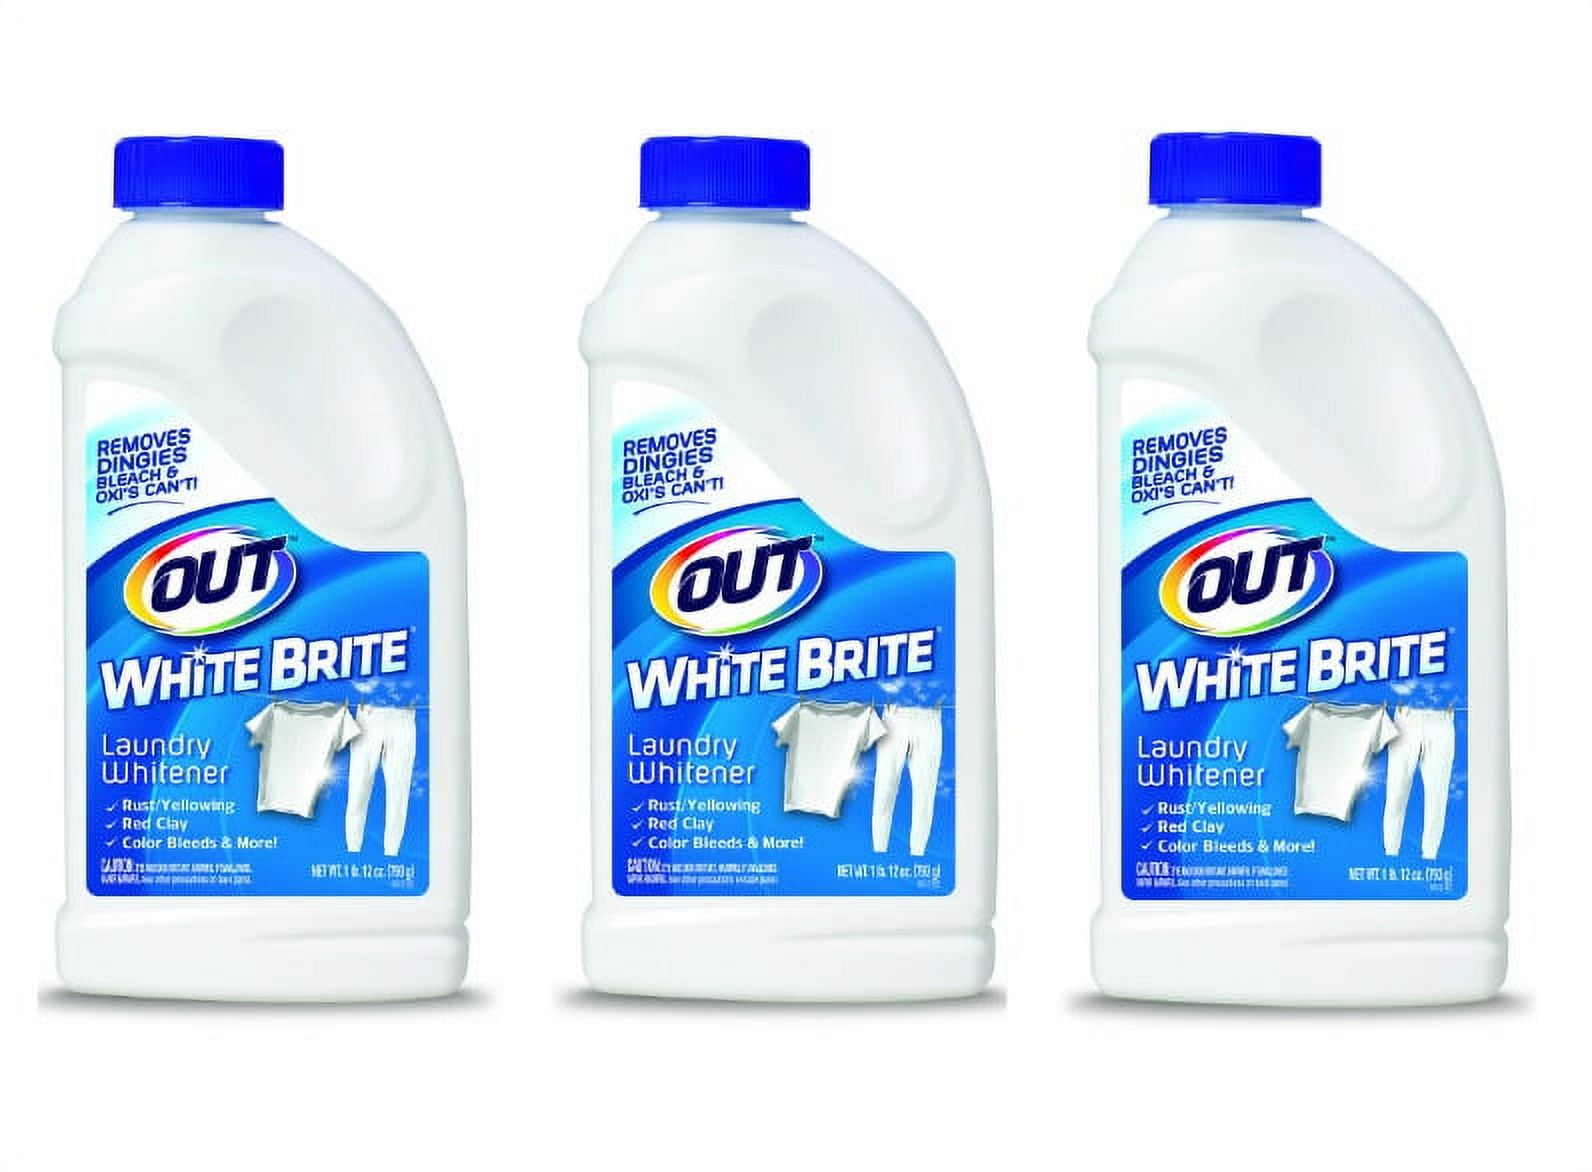  OUT White Brite Laundry Whitener, Removes Red Clay